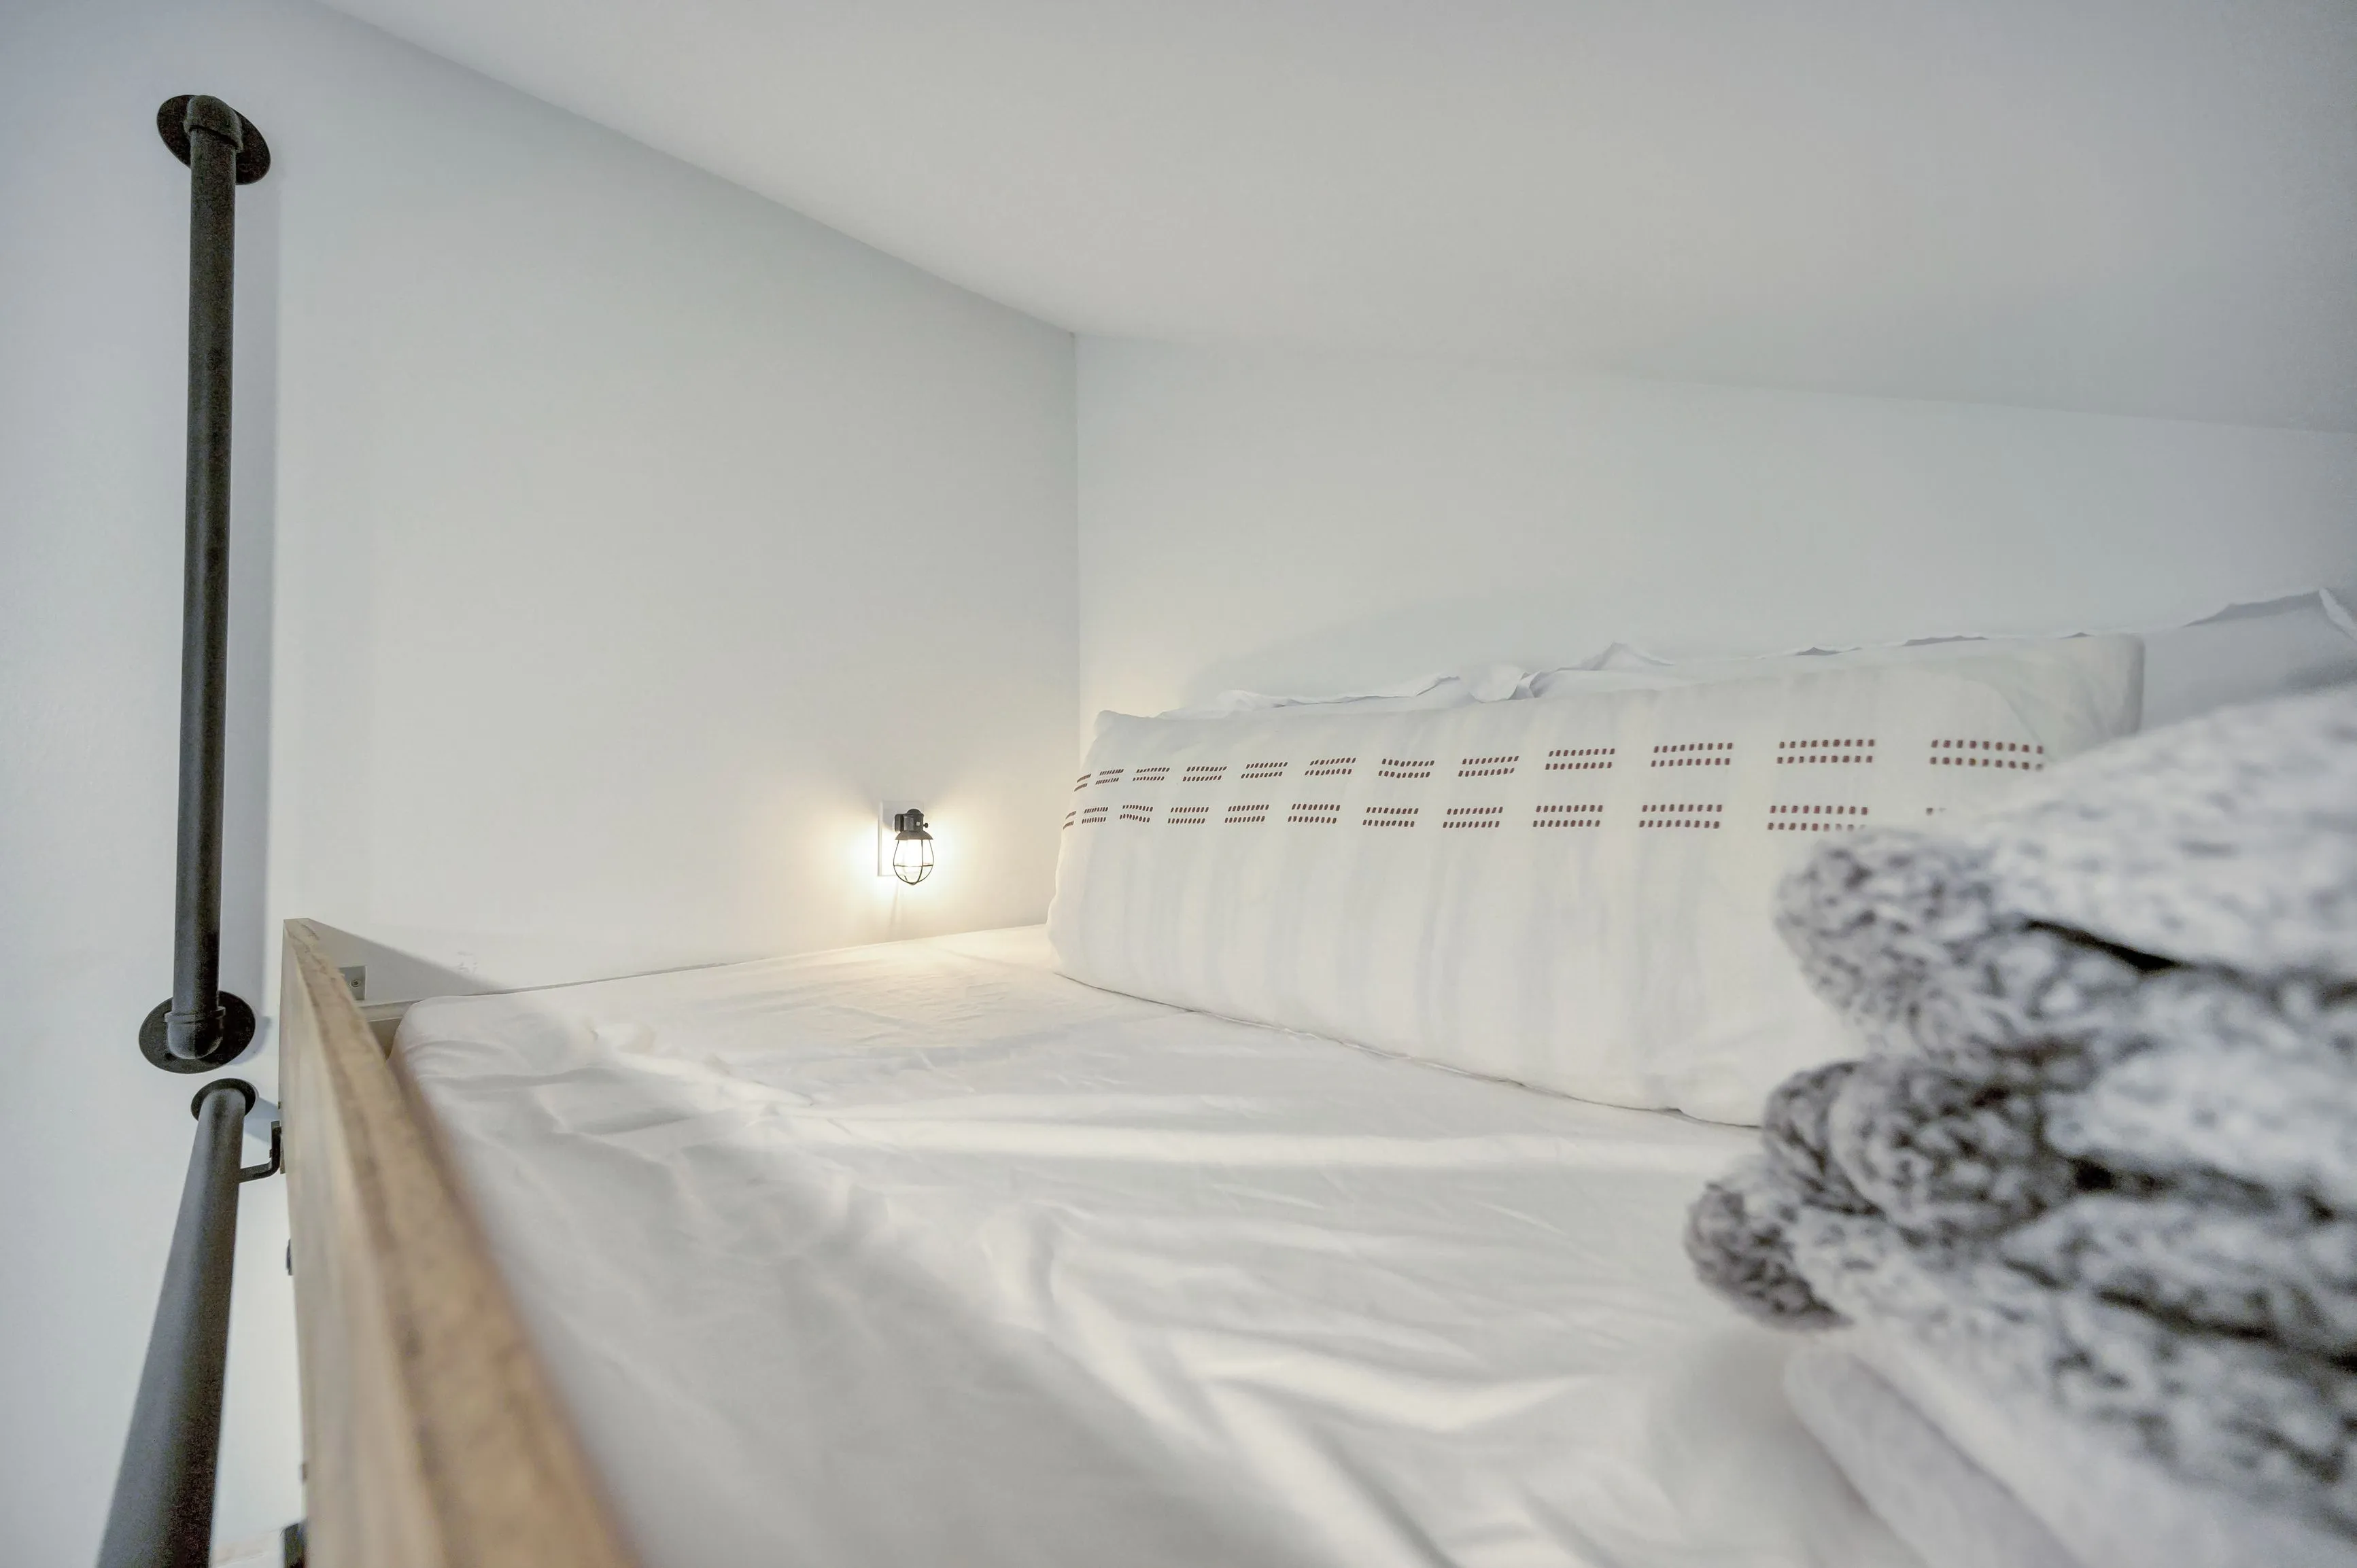 Minimalist bedroom with a white bed, pillows, and a gray knitted blanket, featuring a wall-mounted light and a dark handrail.